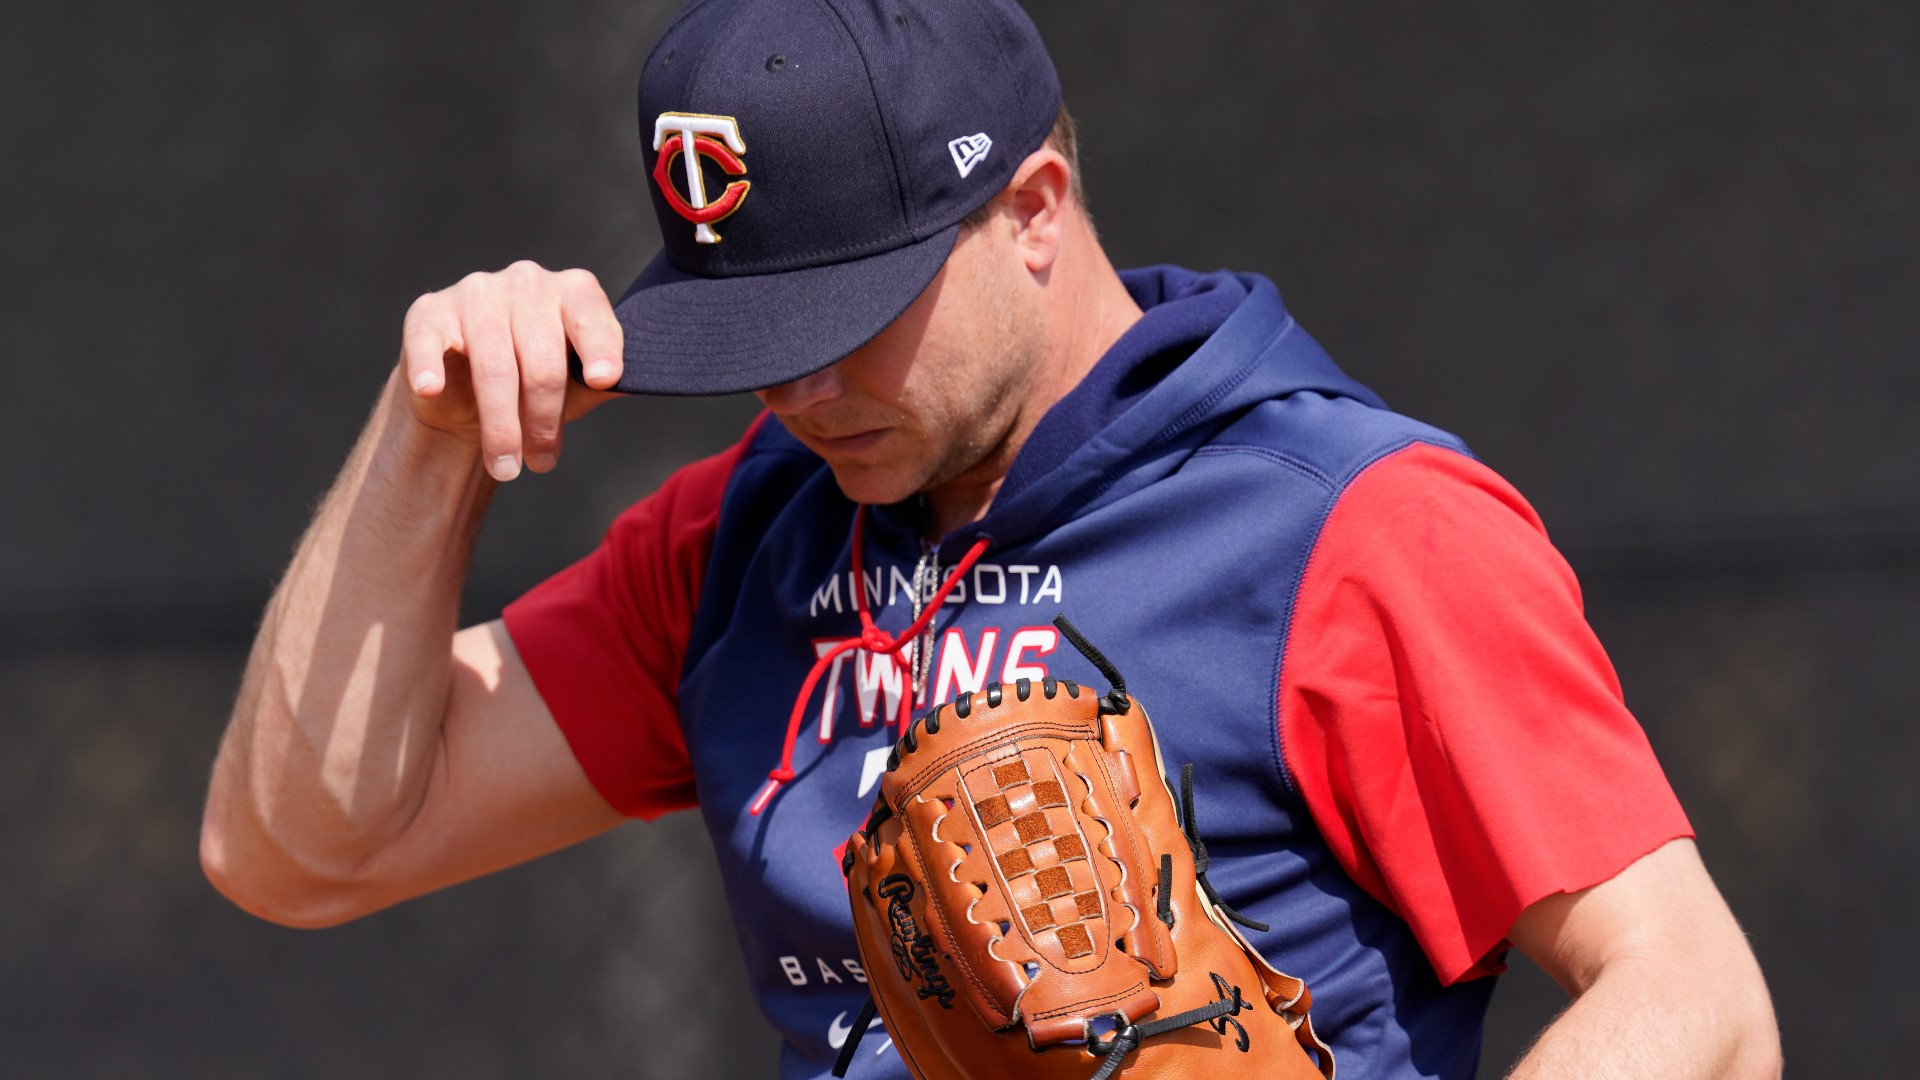 Pitcher Chris Paddack traded to Twins, Taylor Rogers to Padres